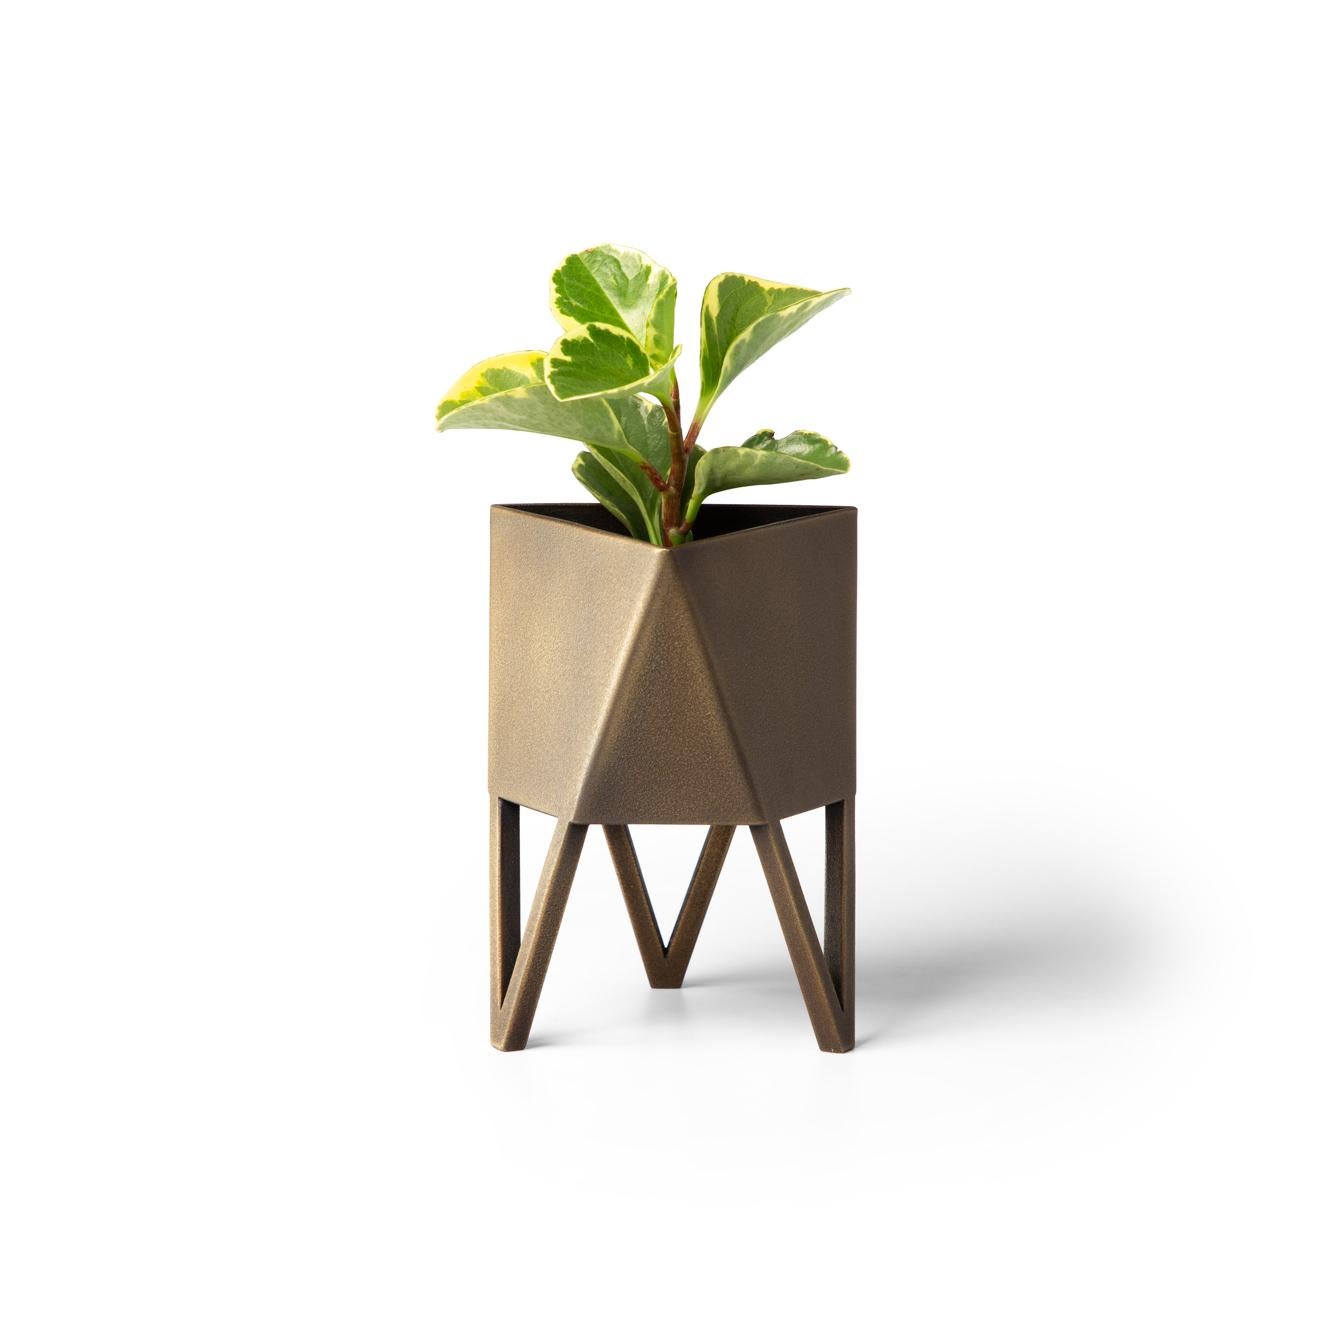 Contemporary Small Deca Planter, Light Pink, Steel, Modern, Geometric by Force/Collide